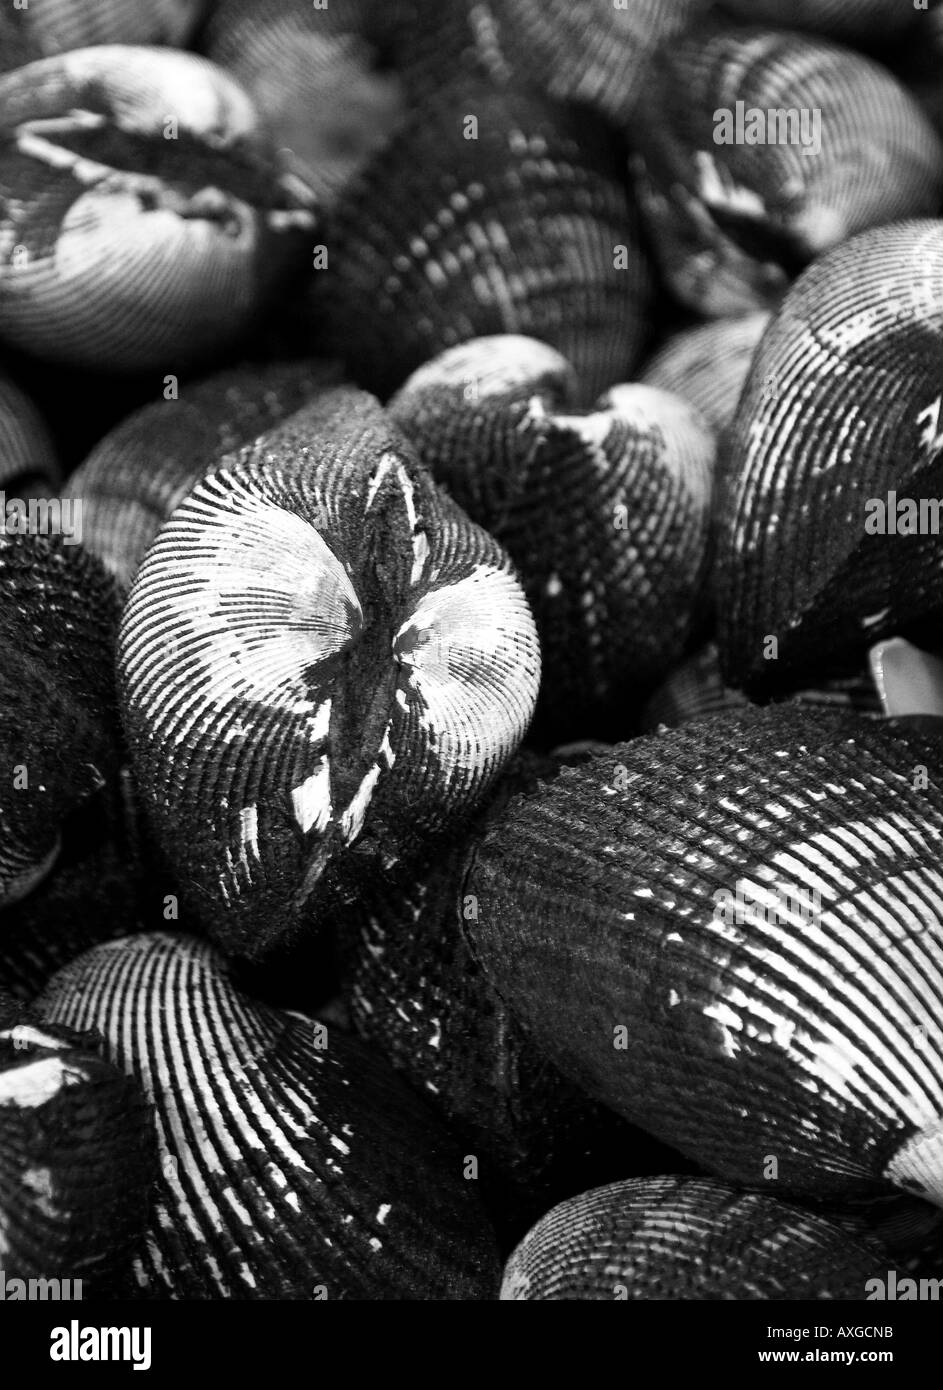 Clam shells on display at Tokyo fish market in black and white Stock Photo